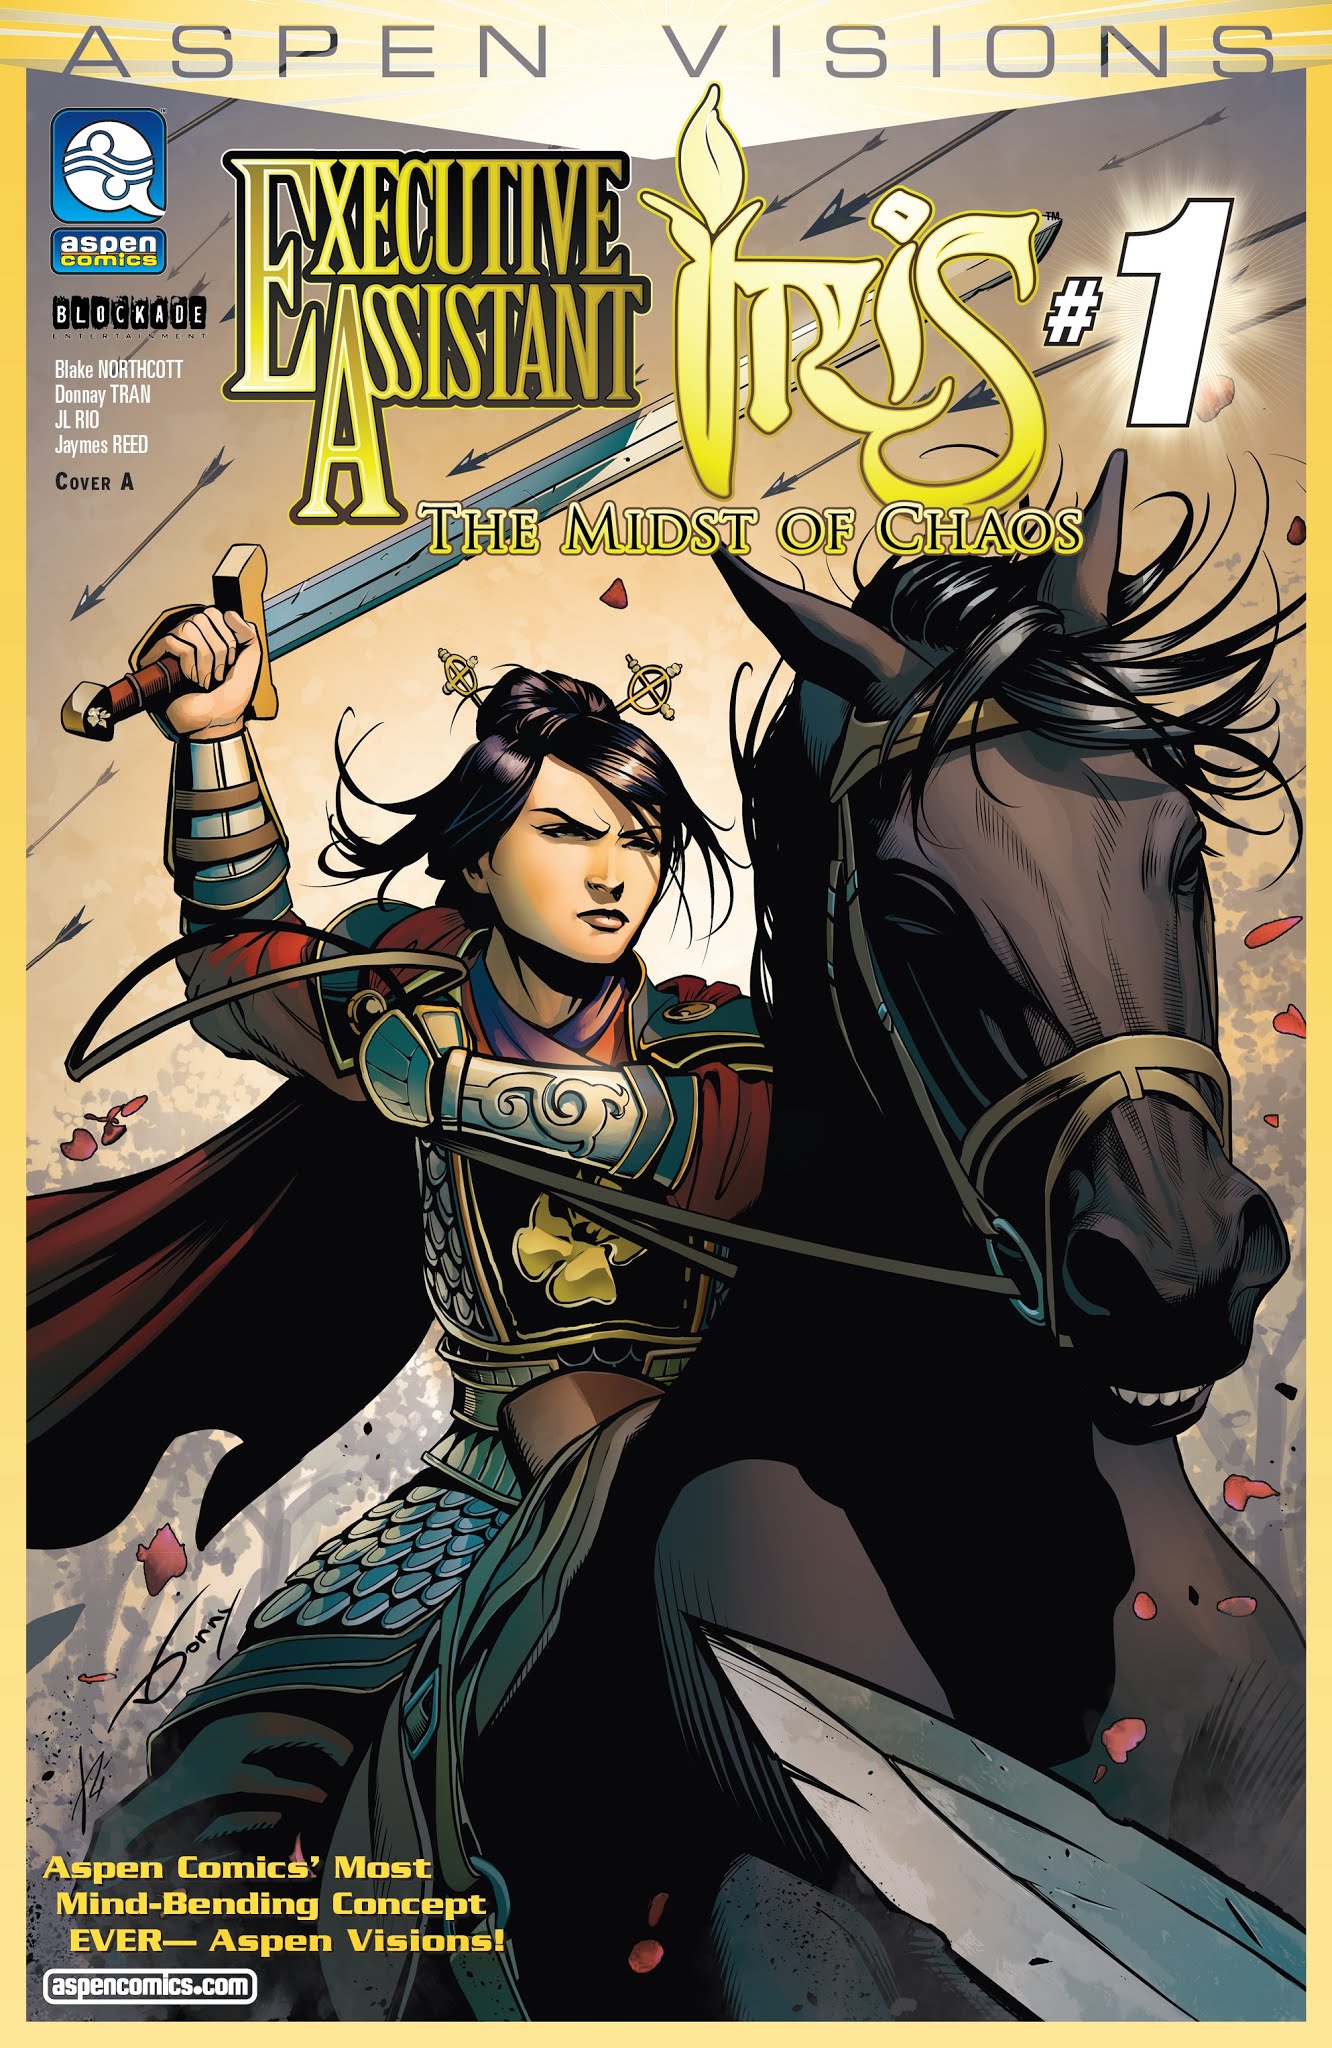 Read online Aspen Visions: Executive Assistant Iris: The Midst of Chaos comic -  Issue #1 - 1